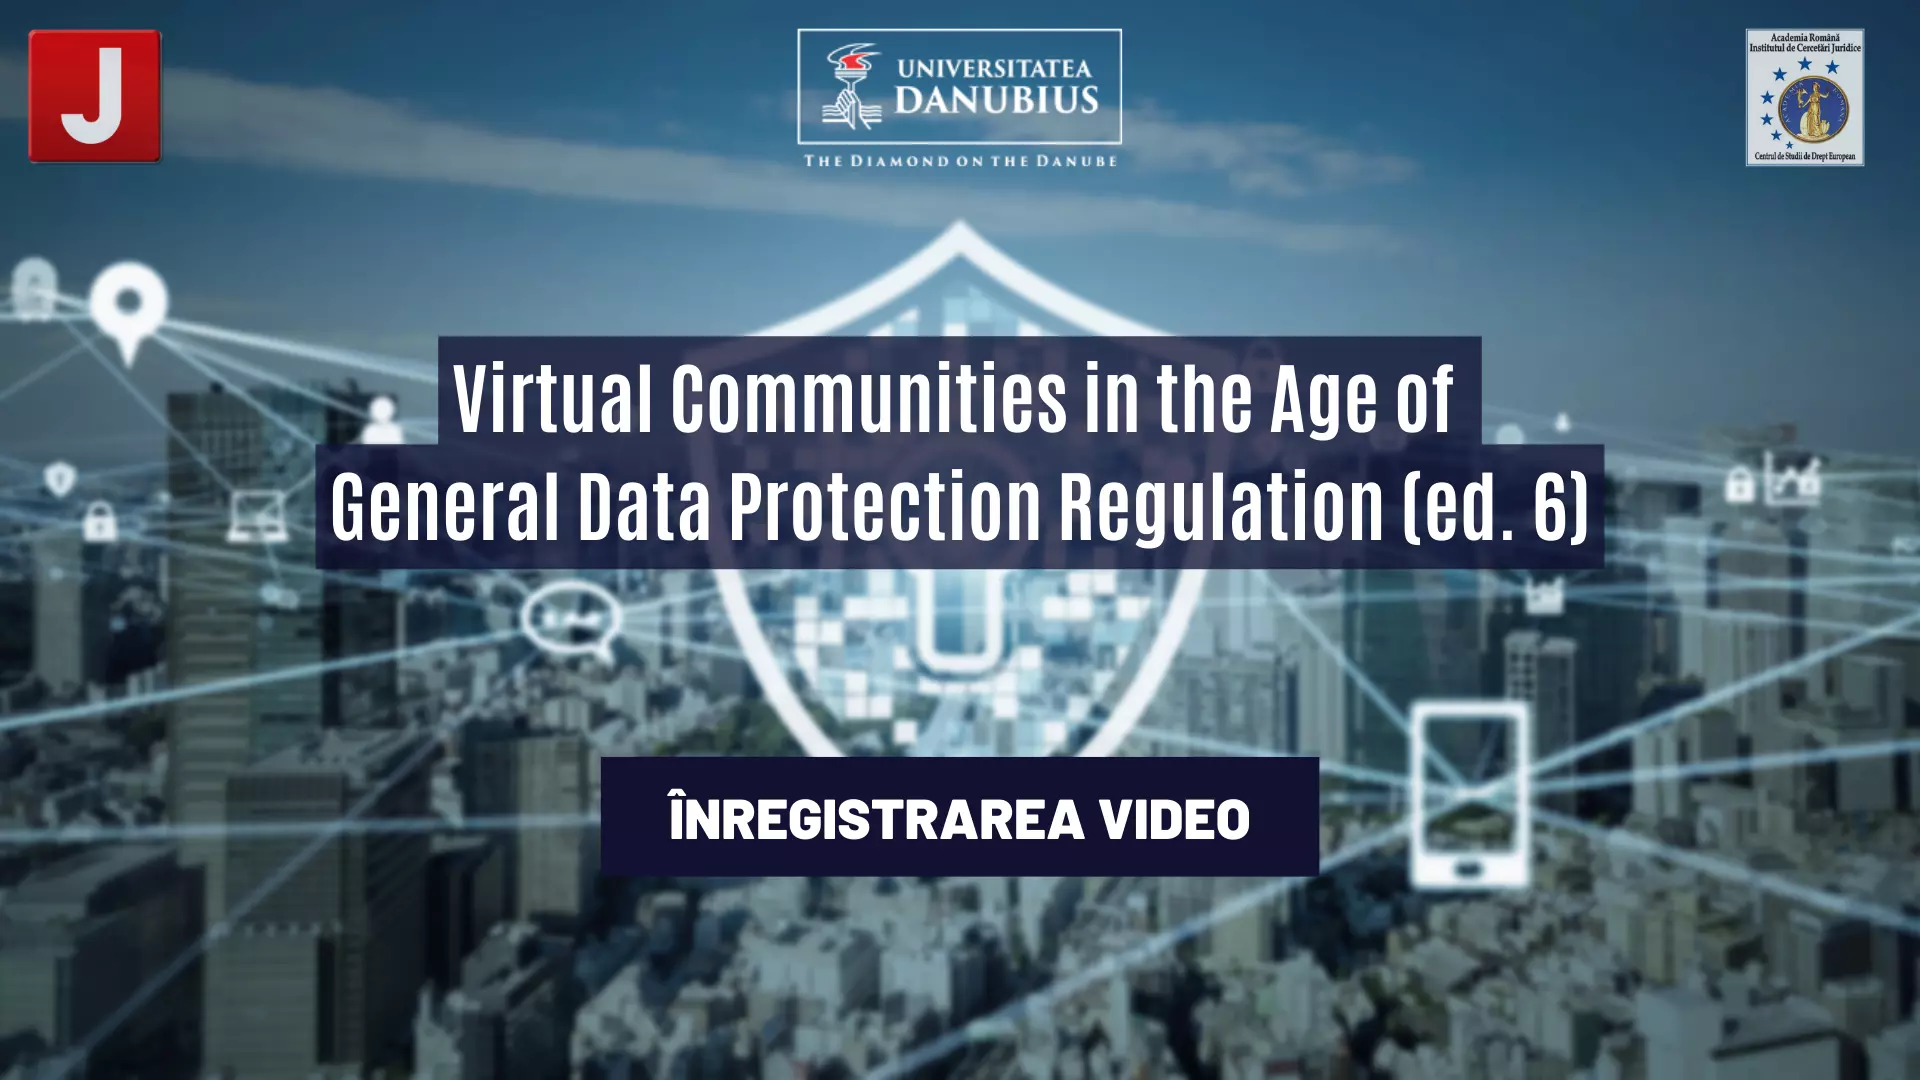 Virtual Communities in the Age of General Data Protection Regulation (ed. 6) / 14 Noiembrie 2022